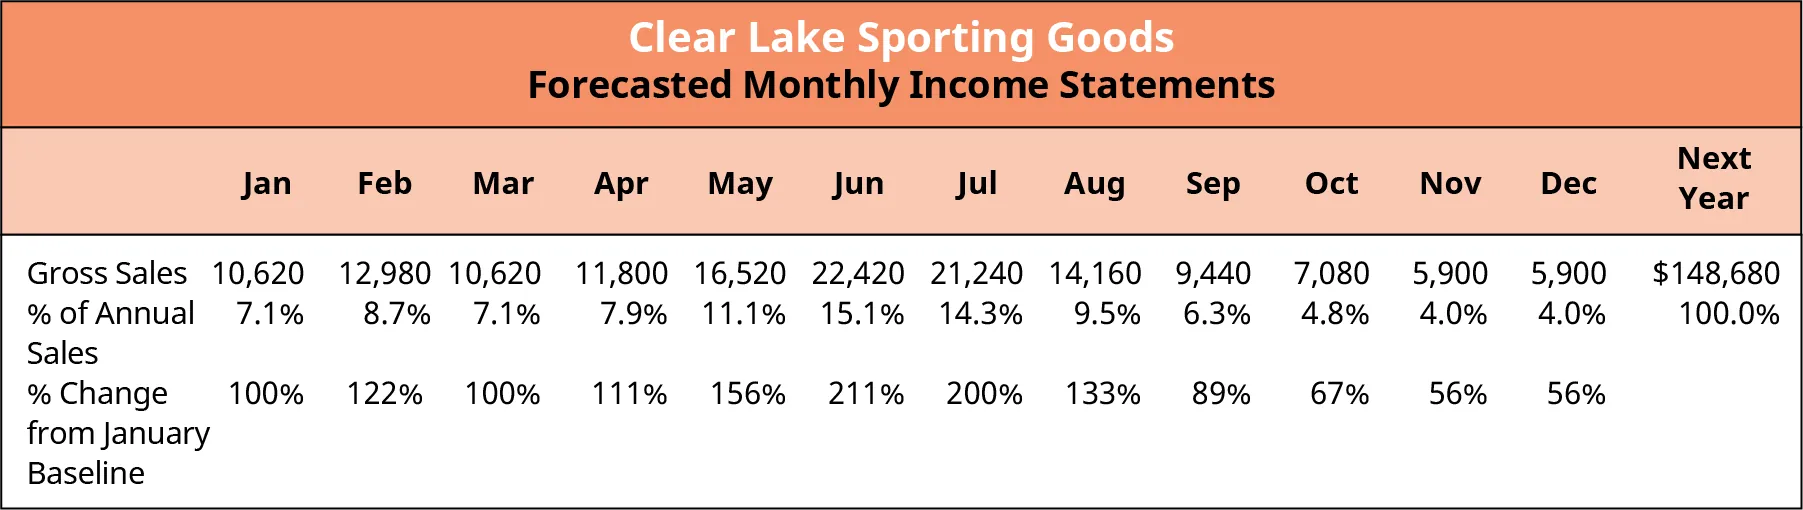 Forecasted Sales Data for Clear Lake Sporting Goods estimates next year's sales will be 18% higher than the current year's sales. To estimate the monthly sales for next year, it is assumed that each month will represent the same percentage of sales as the current year.